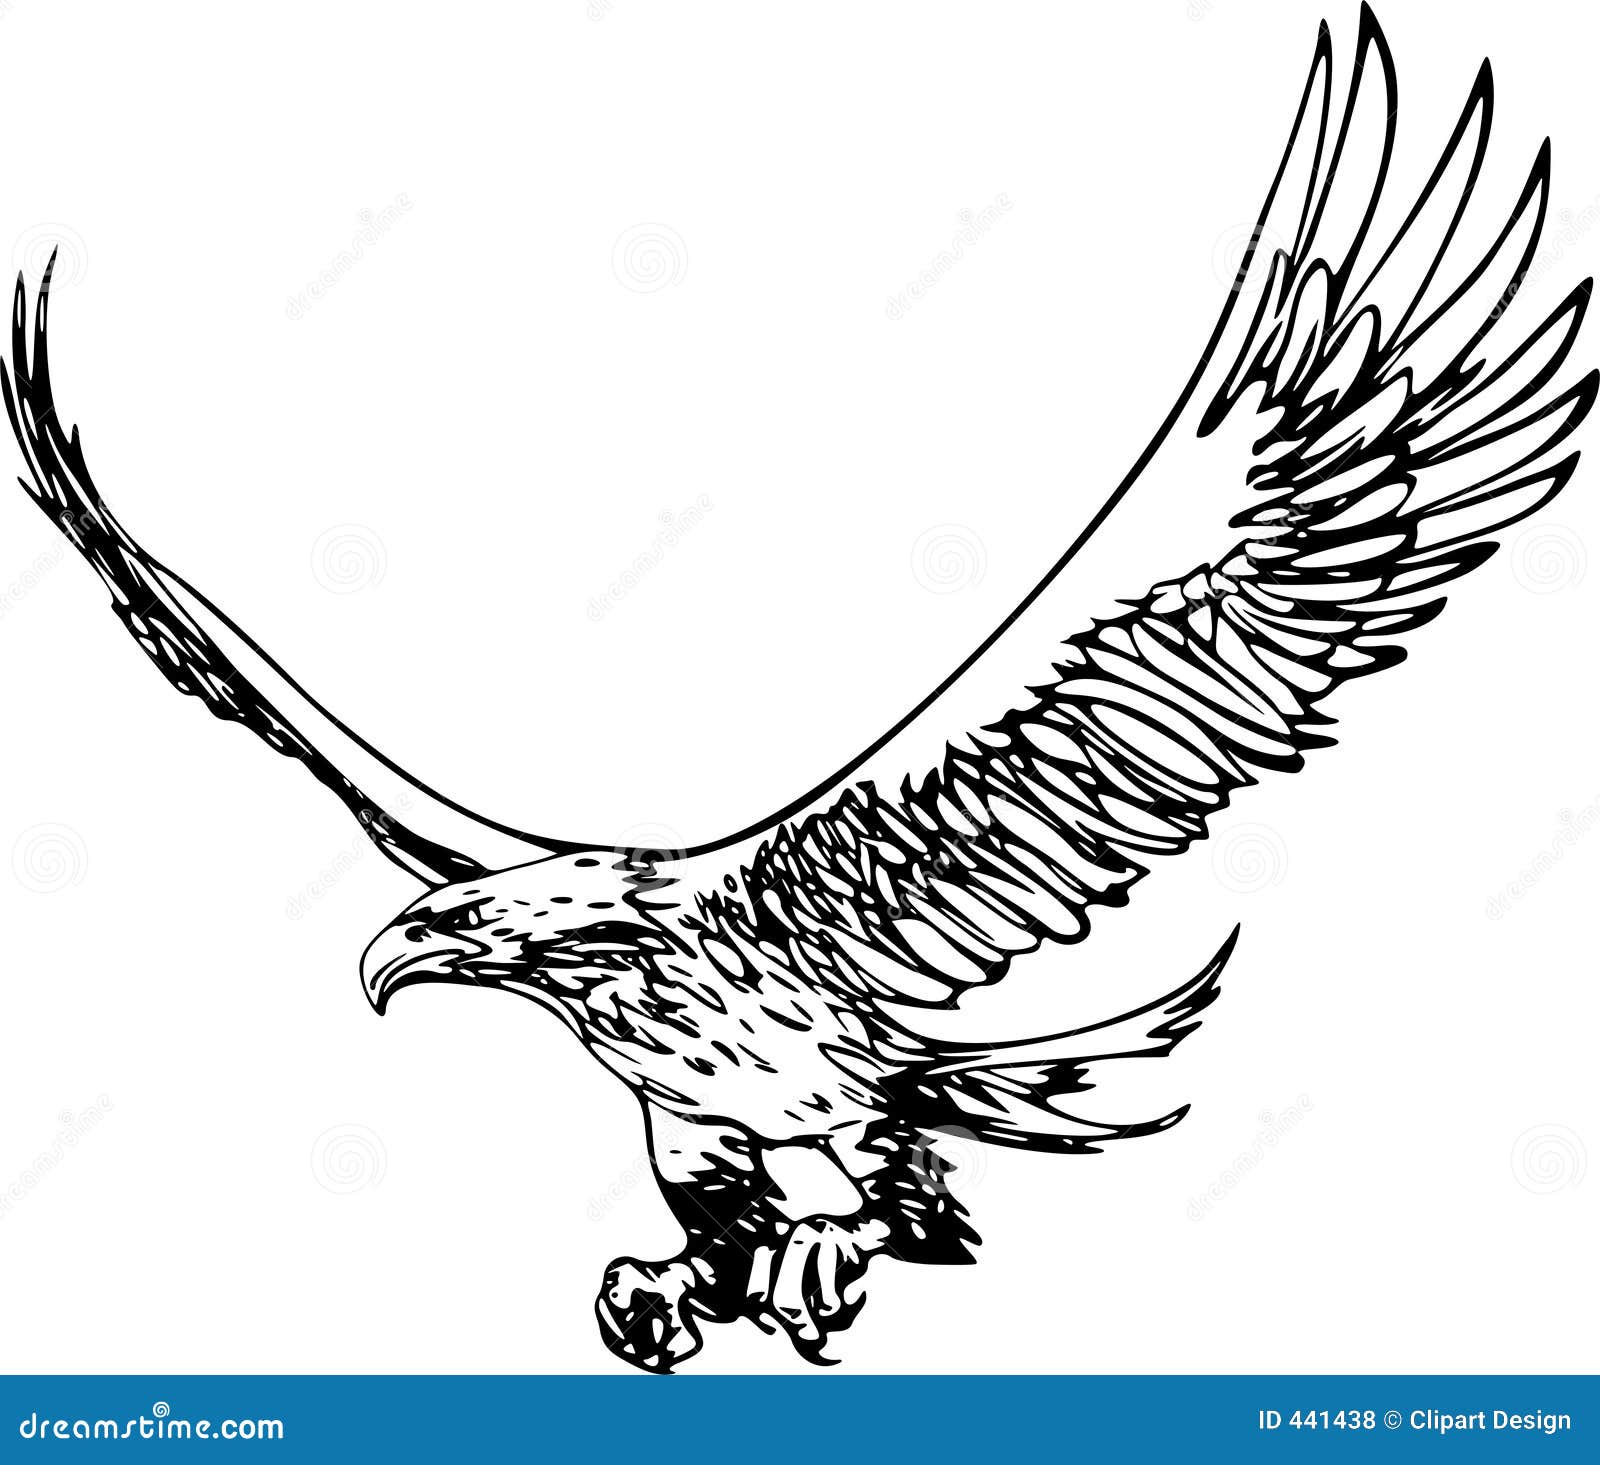 flying eagle clip art free download - photo #17